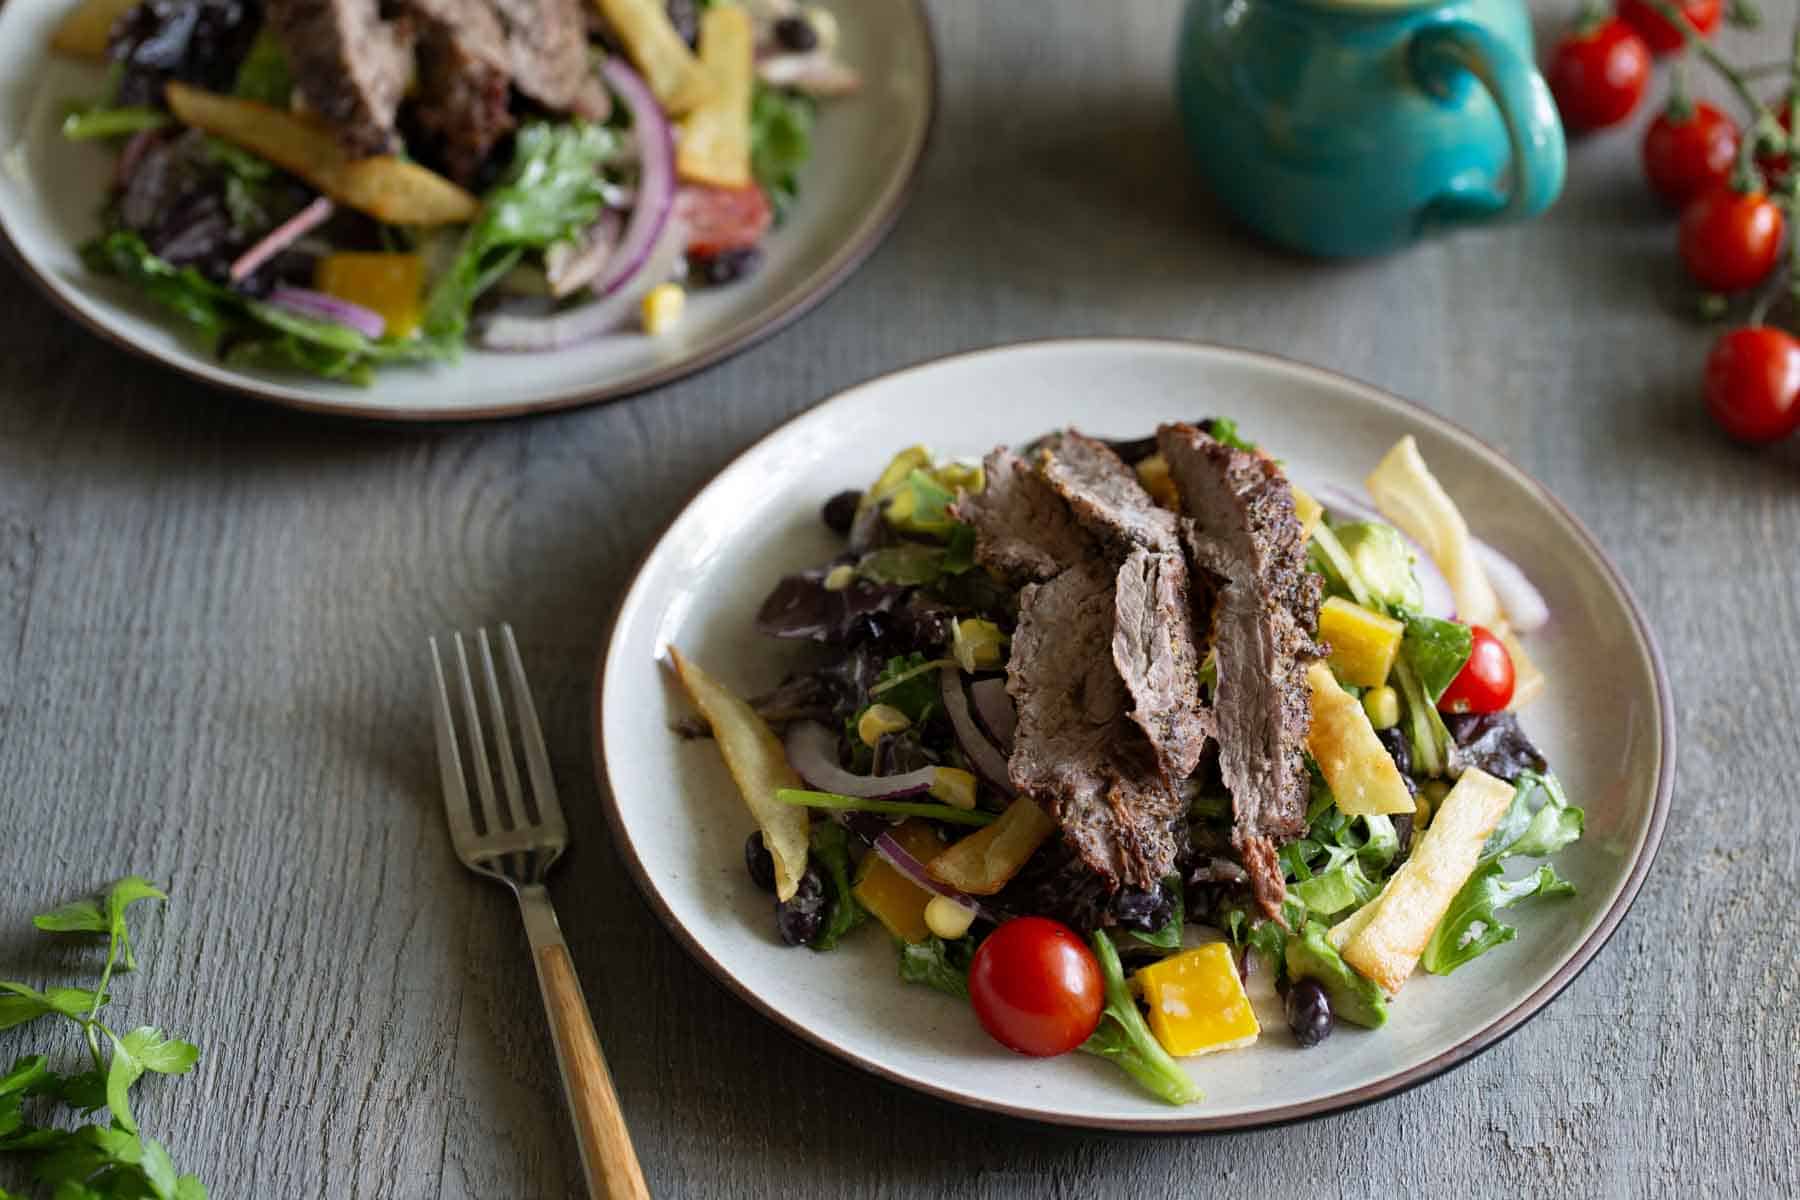 Two plates of salad topped with grilled steak slices and a variety of vegetables, a fork, a turquoise cup, and cherry tomatoes on the side.